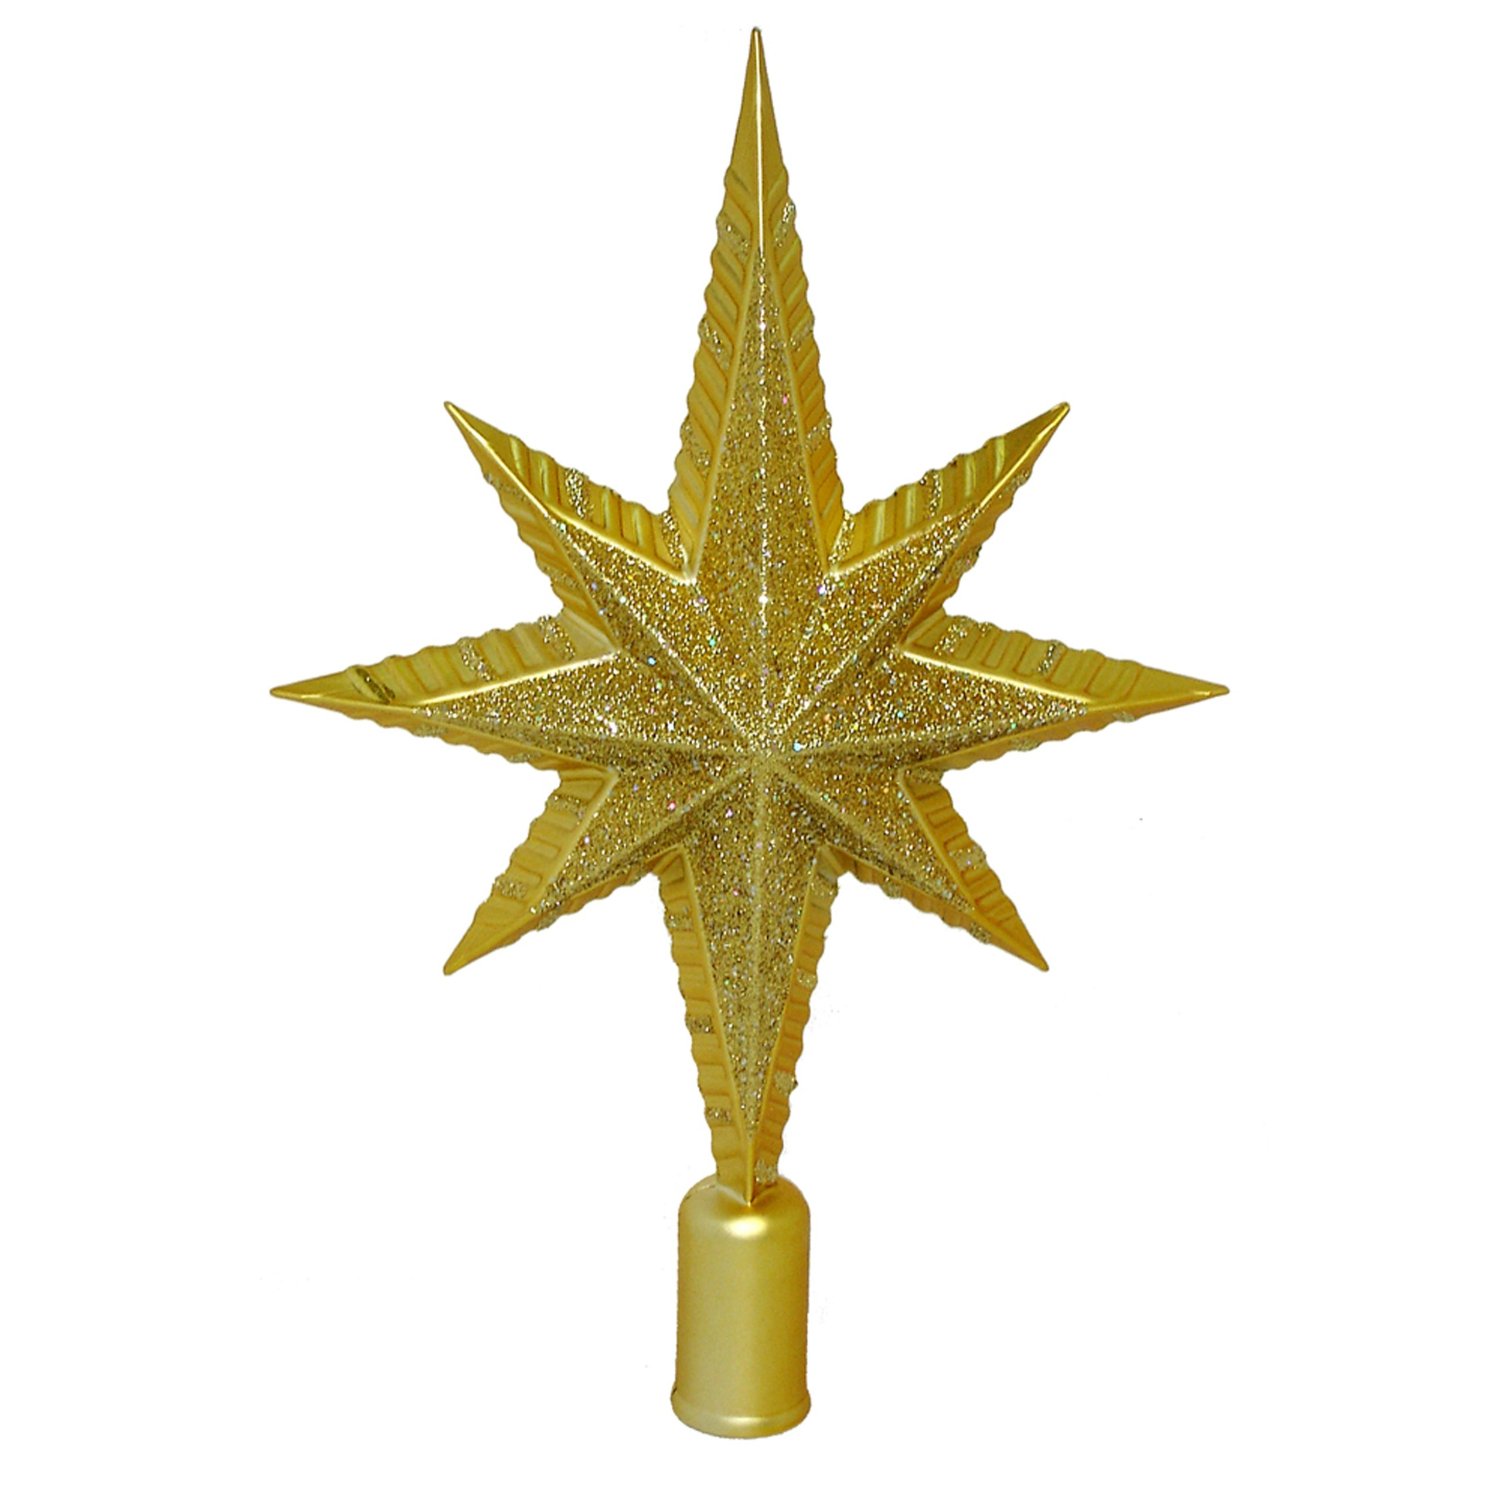 Barcana 12-Inch Shatterproof Gold Northern Star Christmas Tree Topper